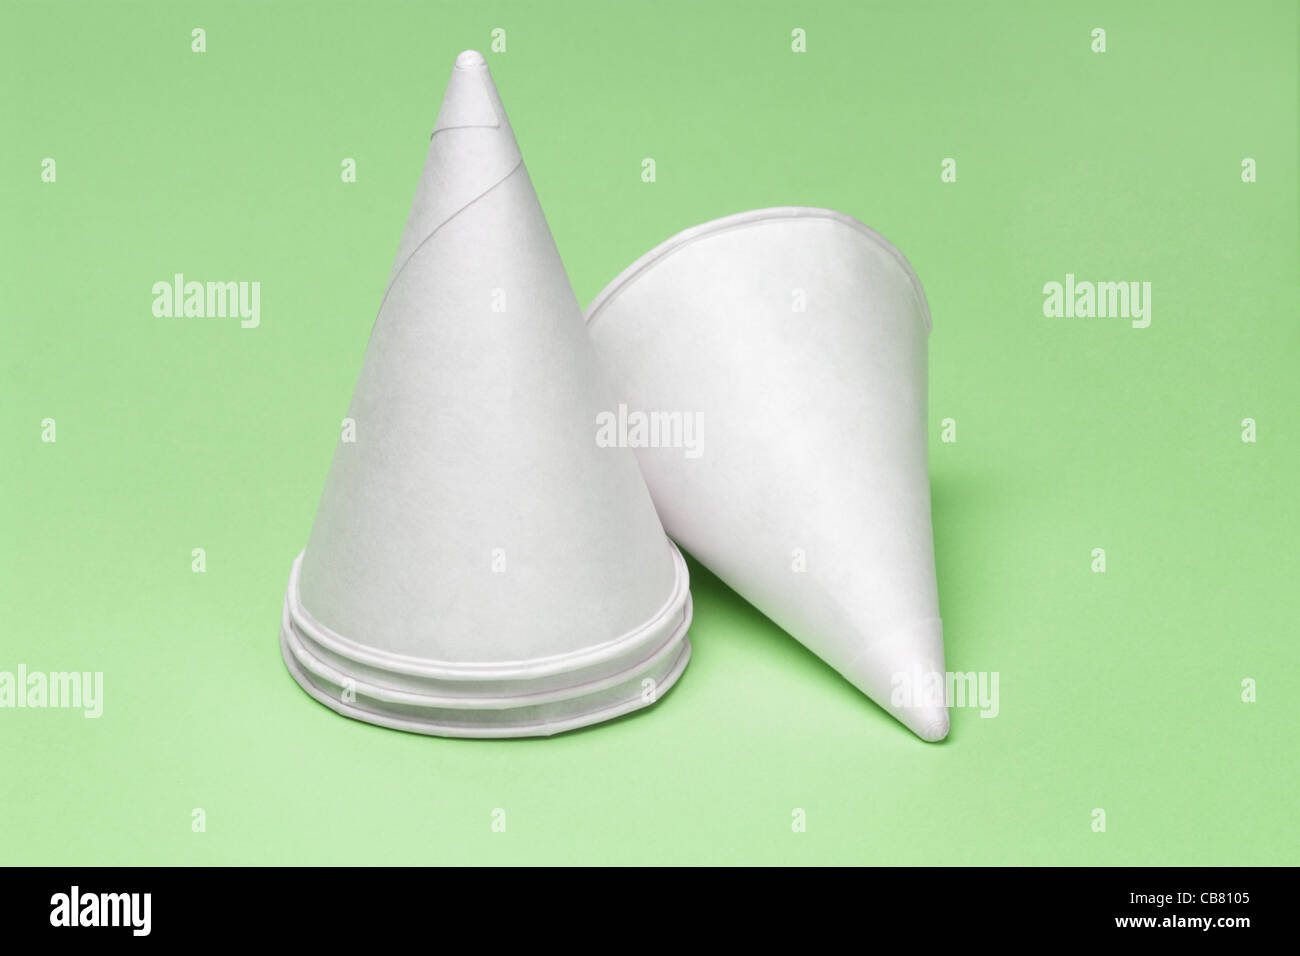 Cone shape disposable paper cups on green background Stock Photo